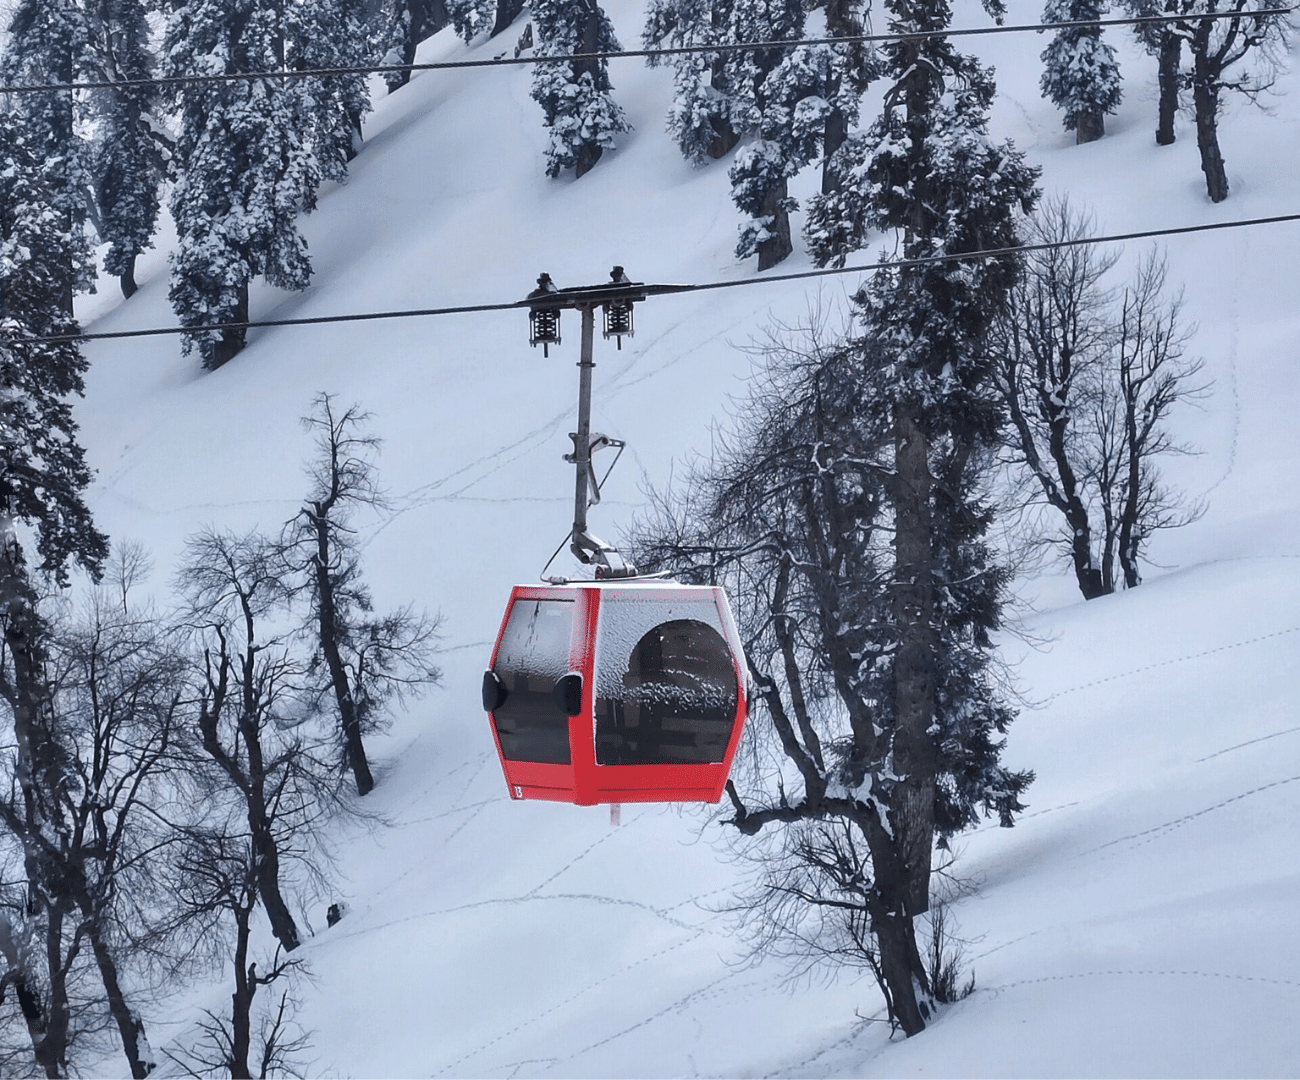 Gondola ride included in our kashmir tour packages